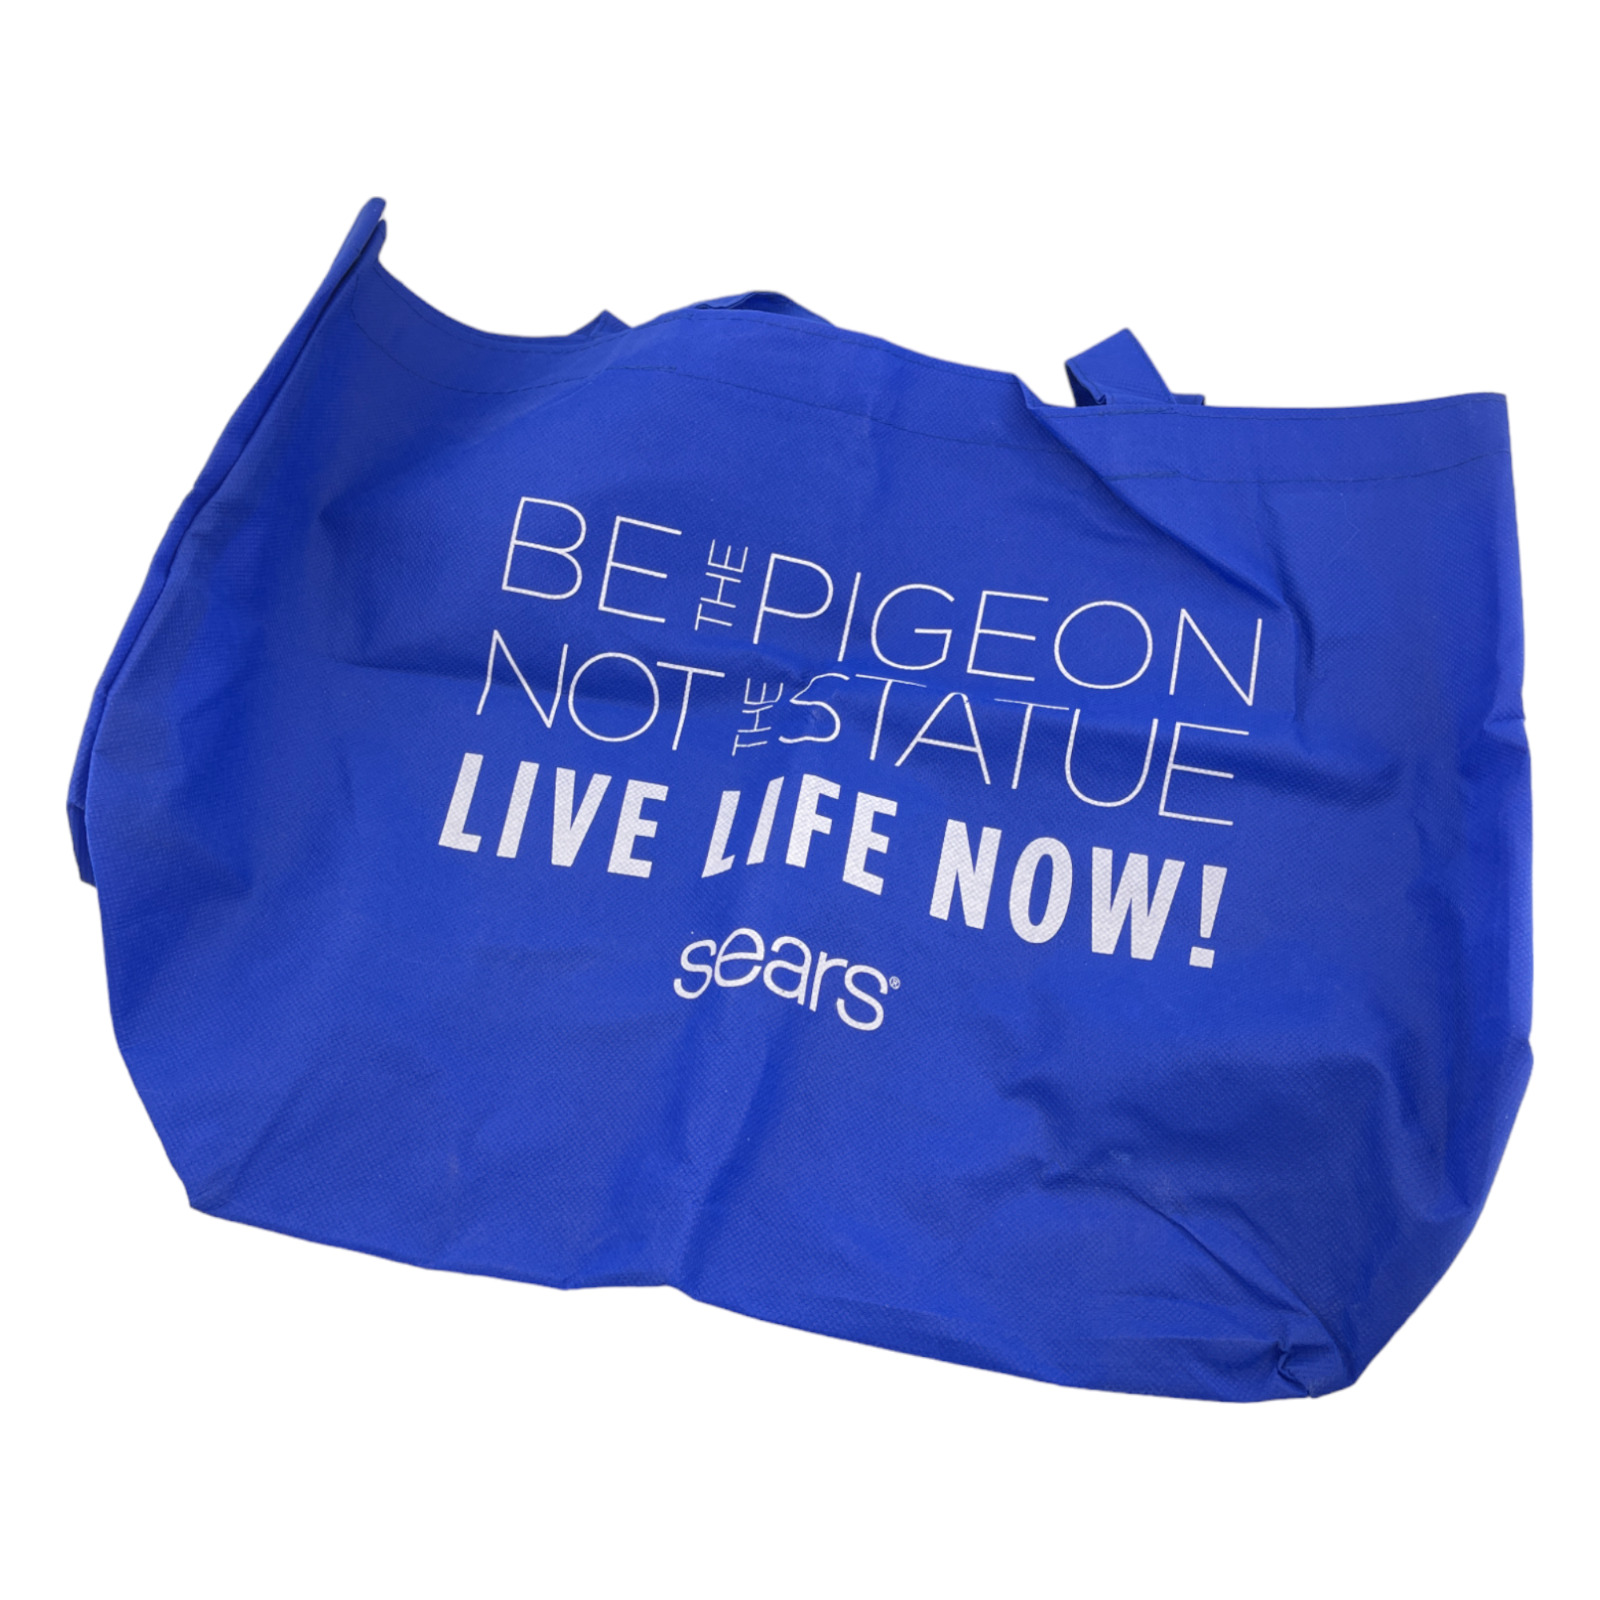 Sears Blue Shopping Tote Fabric Bag LIVE LIFE NOW - Retail Collectible